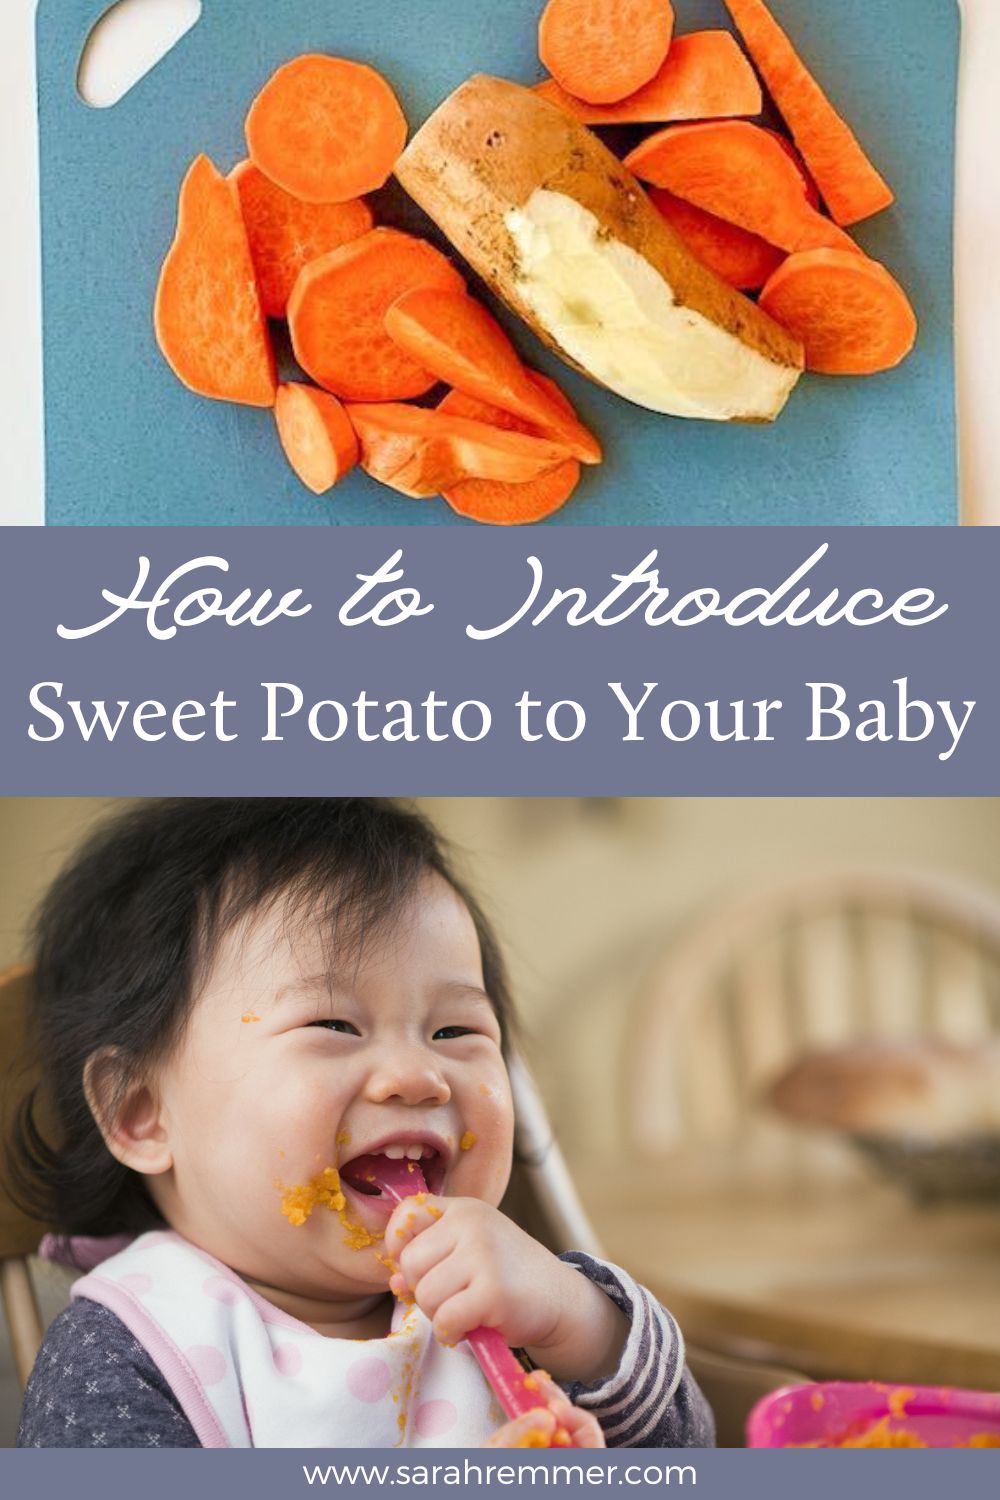 Everything you need to know about baby-led weaning with sweet potato from a registered dietitian. How to introduce sweet potato to baby.